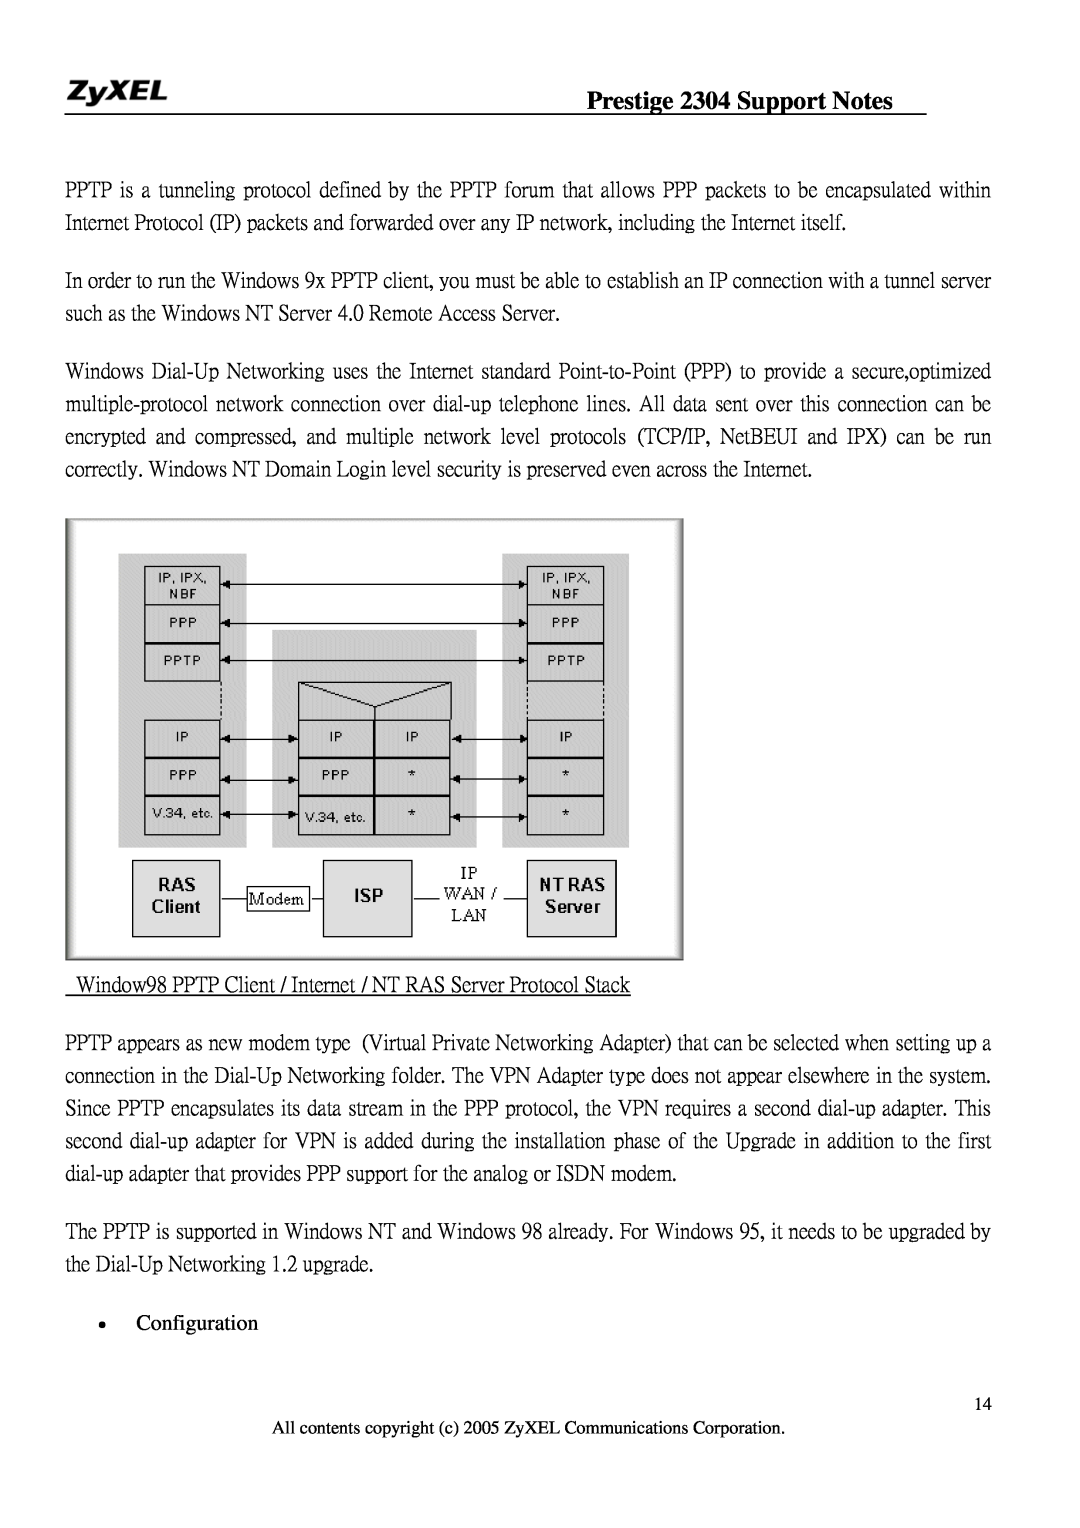 ZyXEL Communications 2304R-P1 Prestige 2304 Support Notes, Window98 PPTP Client / Internet / NT RAS Server Protocol Stack 